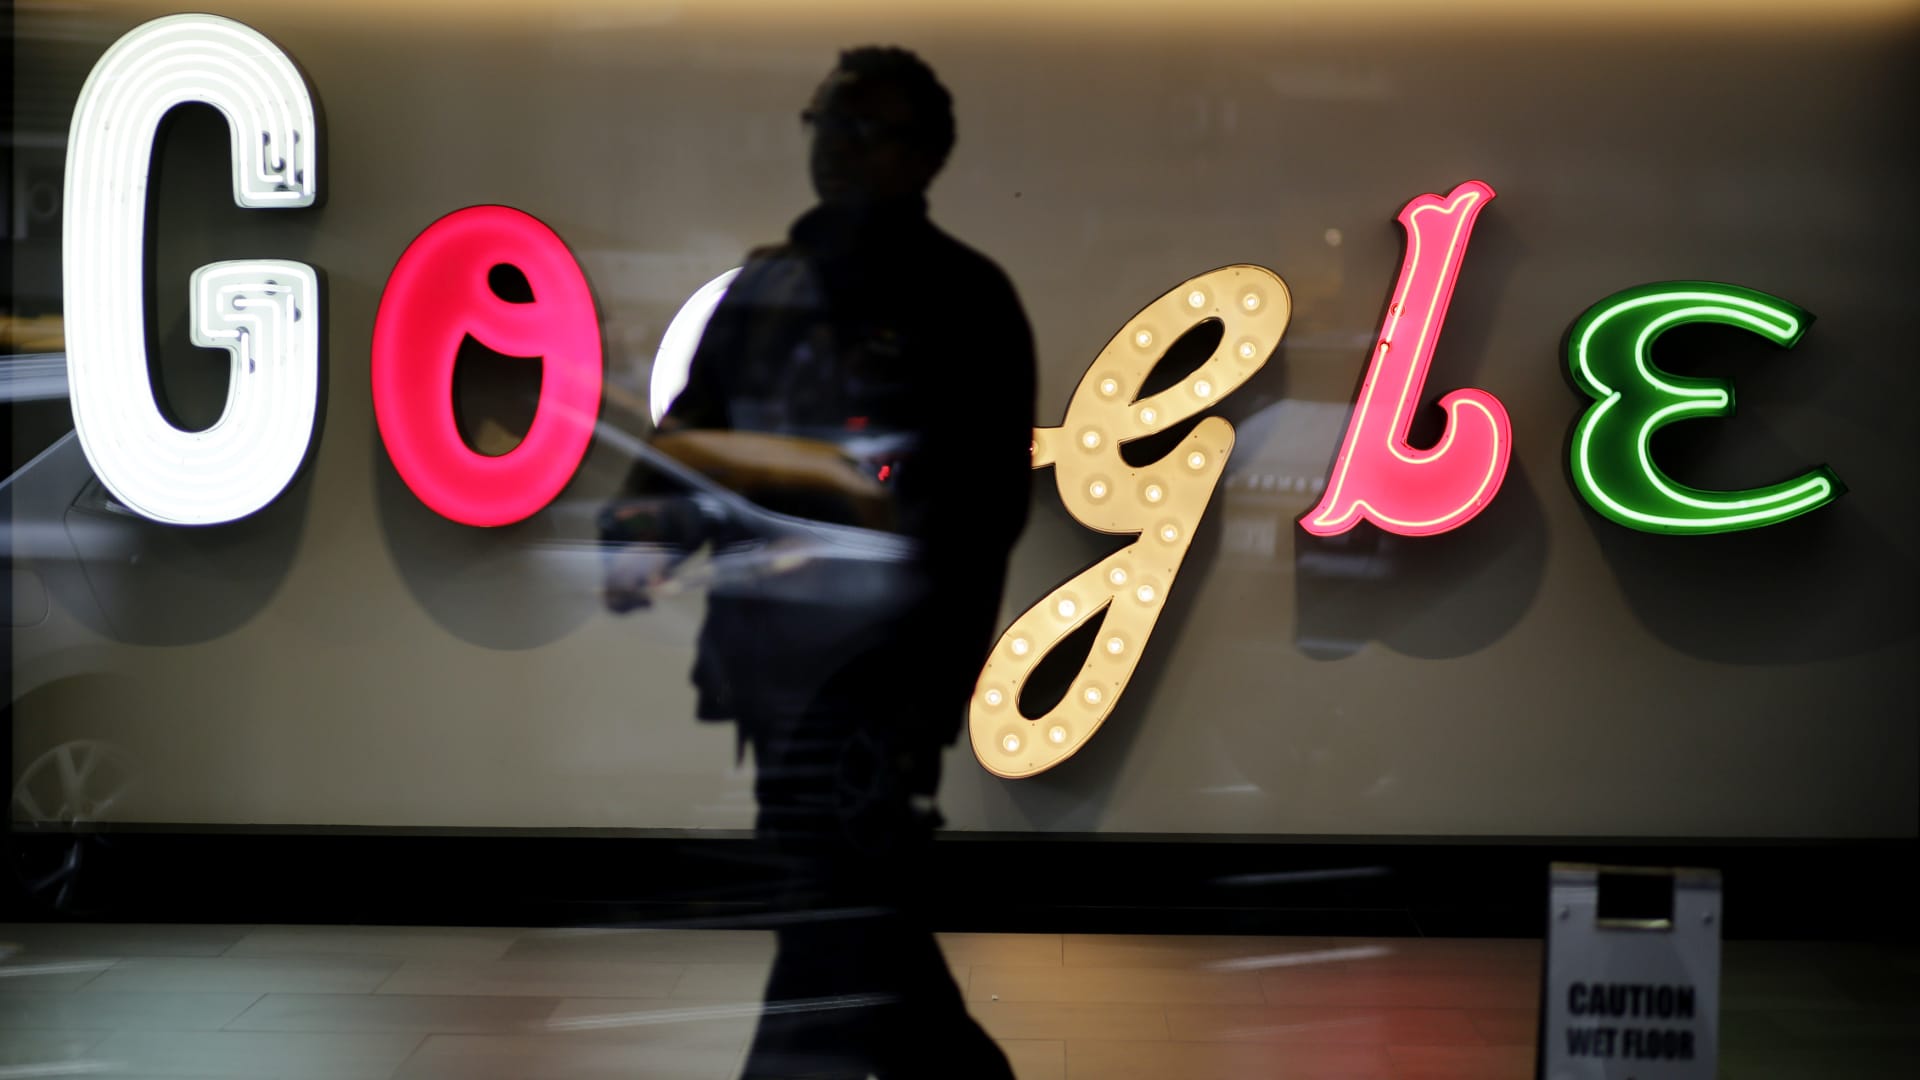 Google restricting internet access to some employees to reduce cyberattack risk